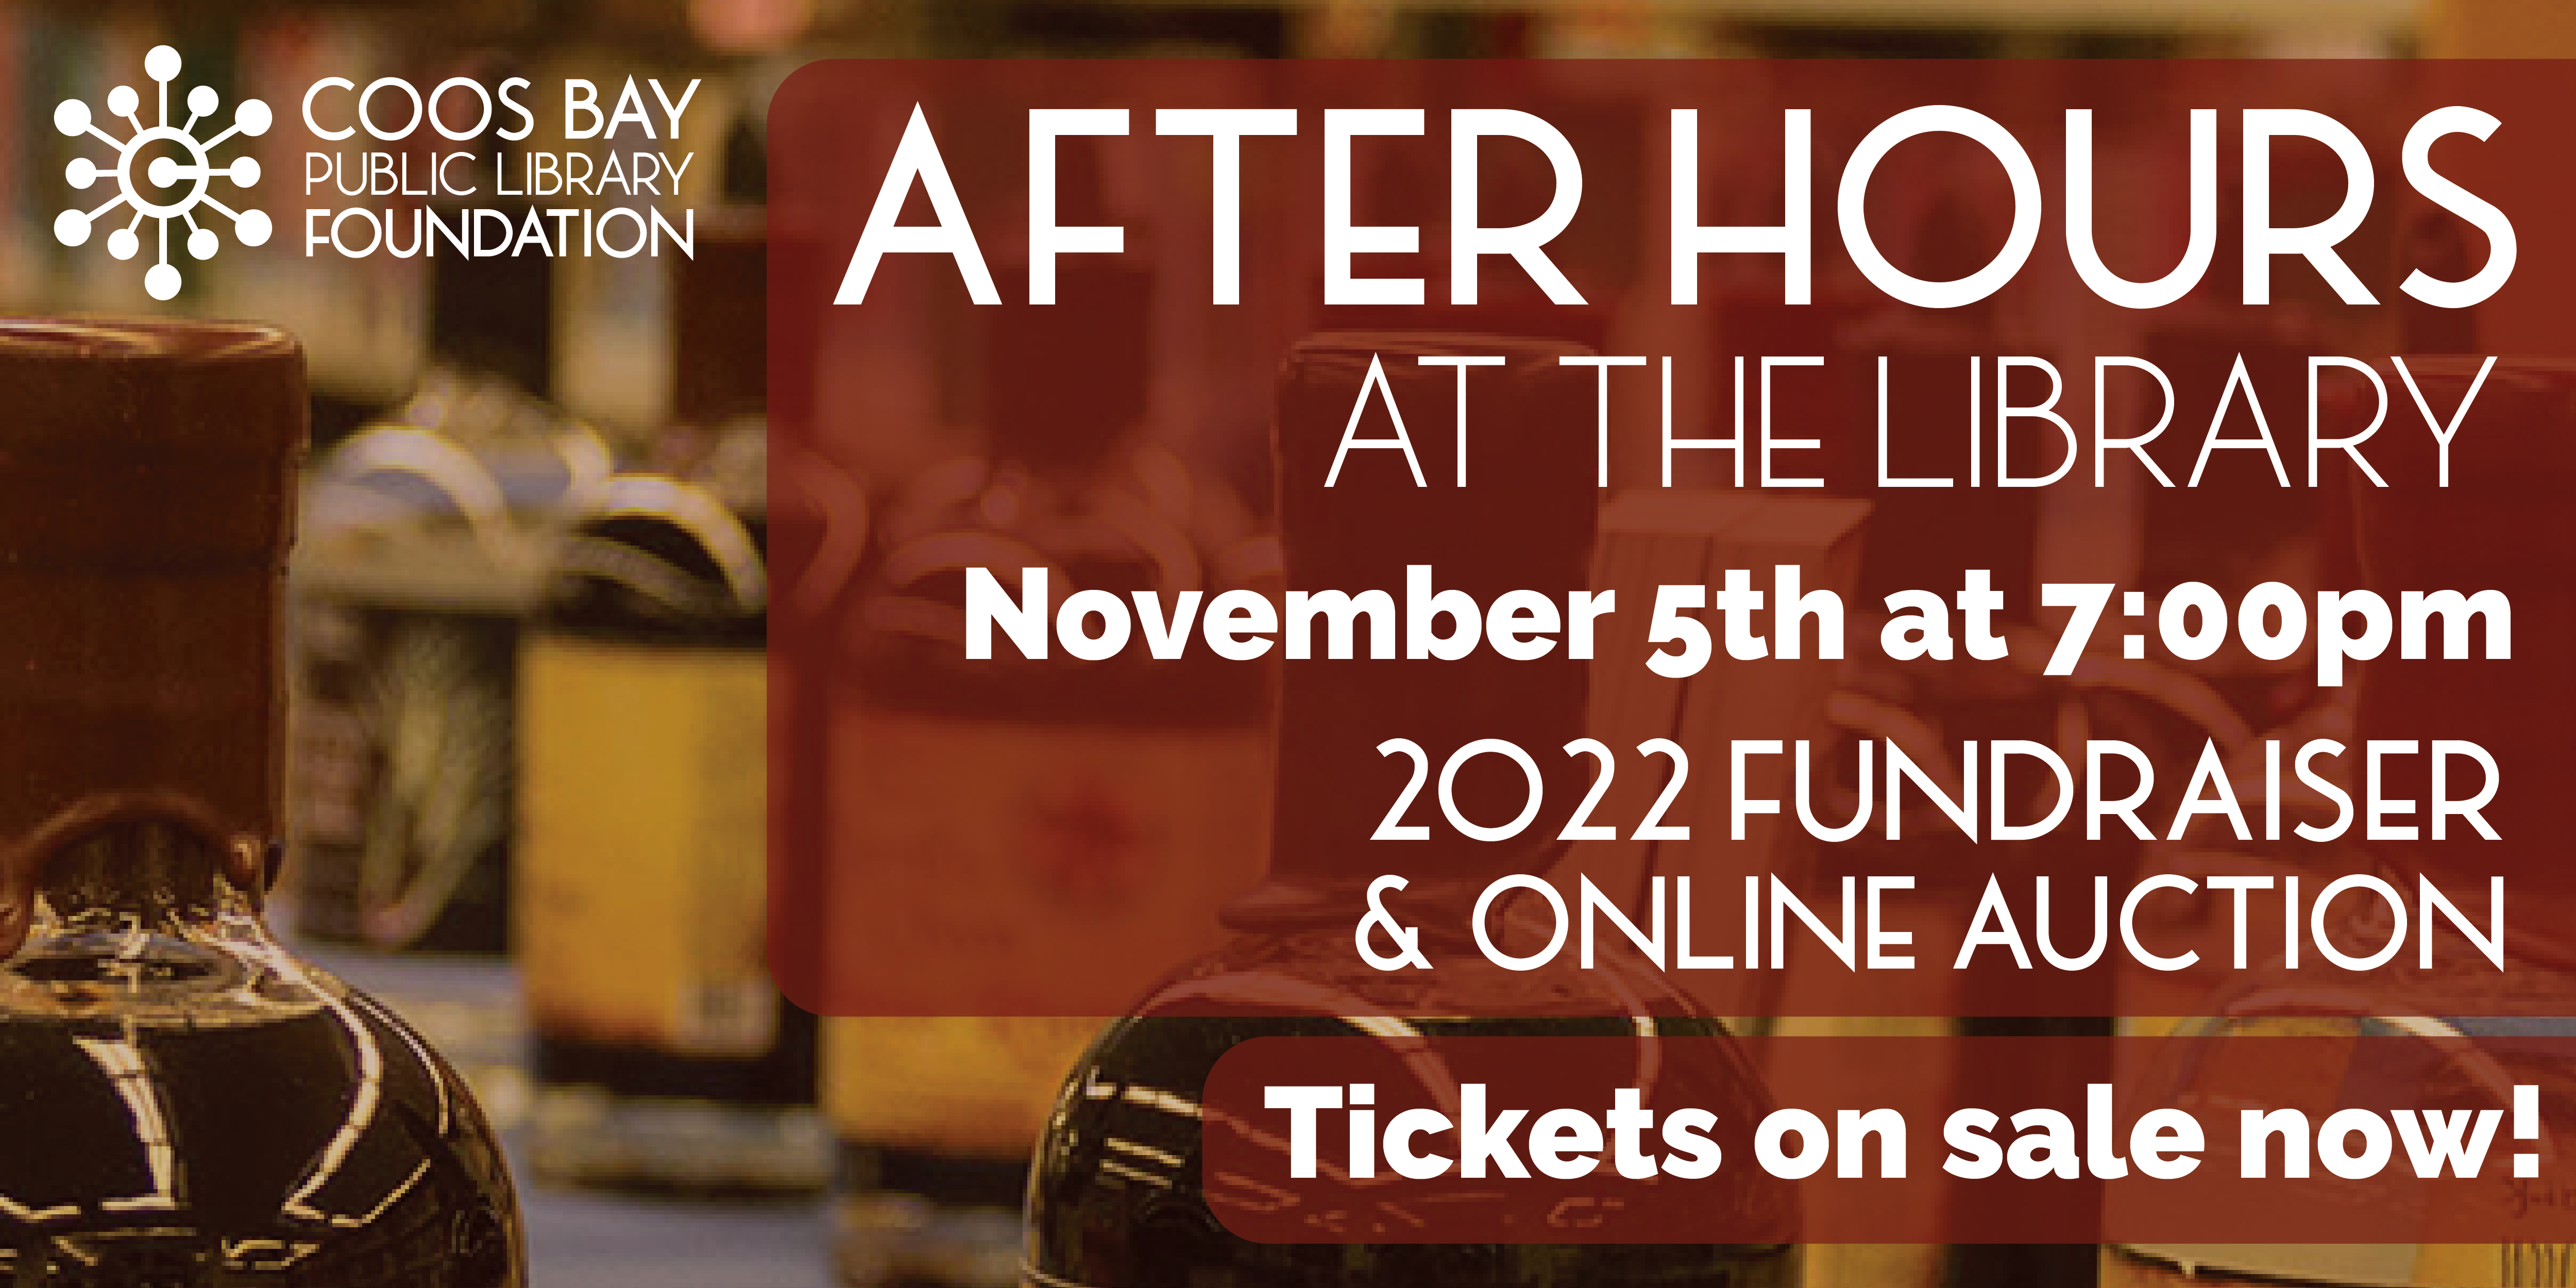 After Hours at the Library, November 5th at 7:00pm, 2022 Fundraiser and Online Auction, Tickets on sale now!